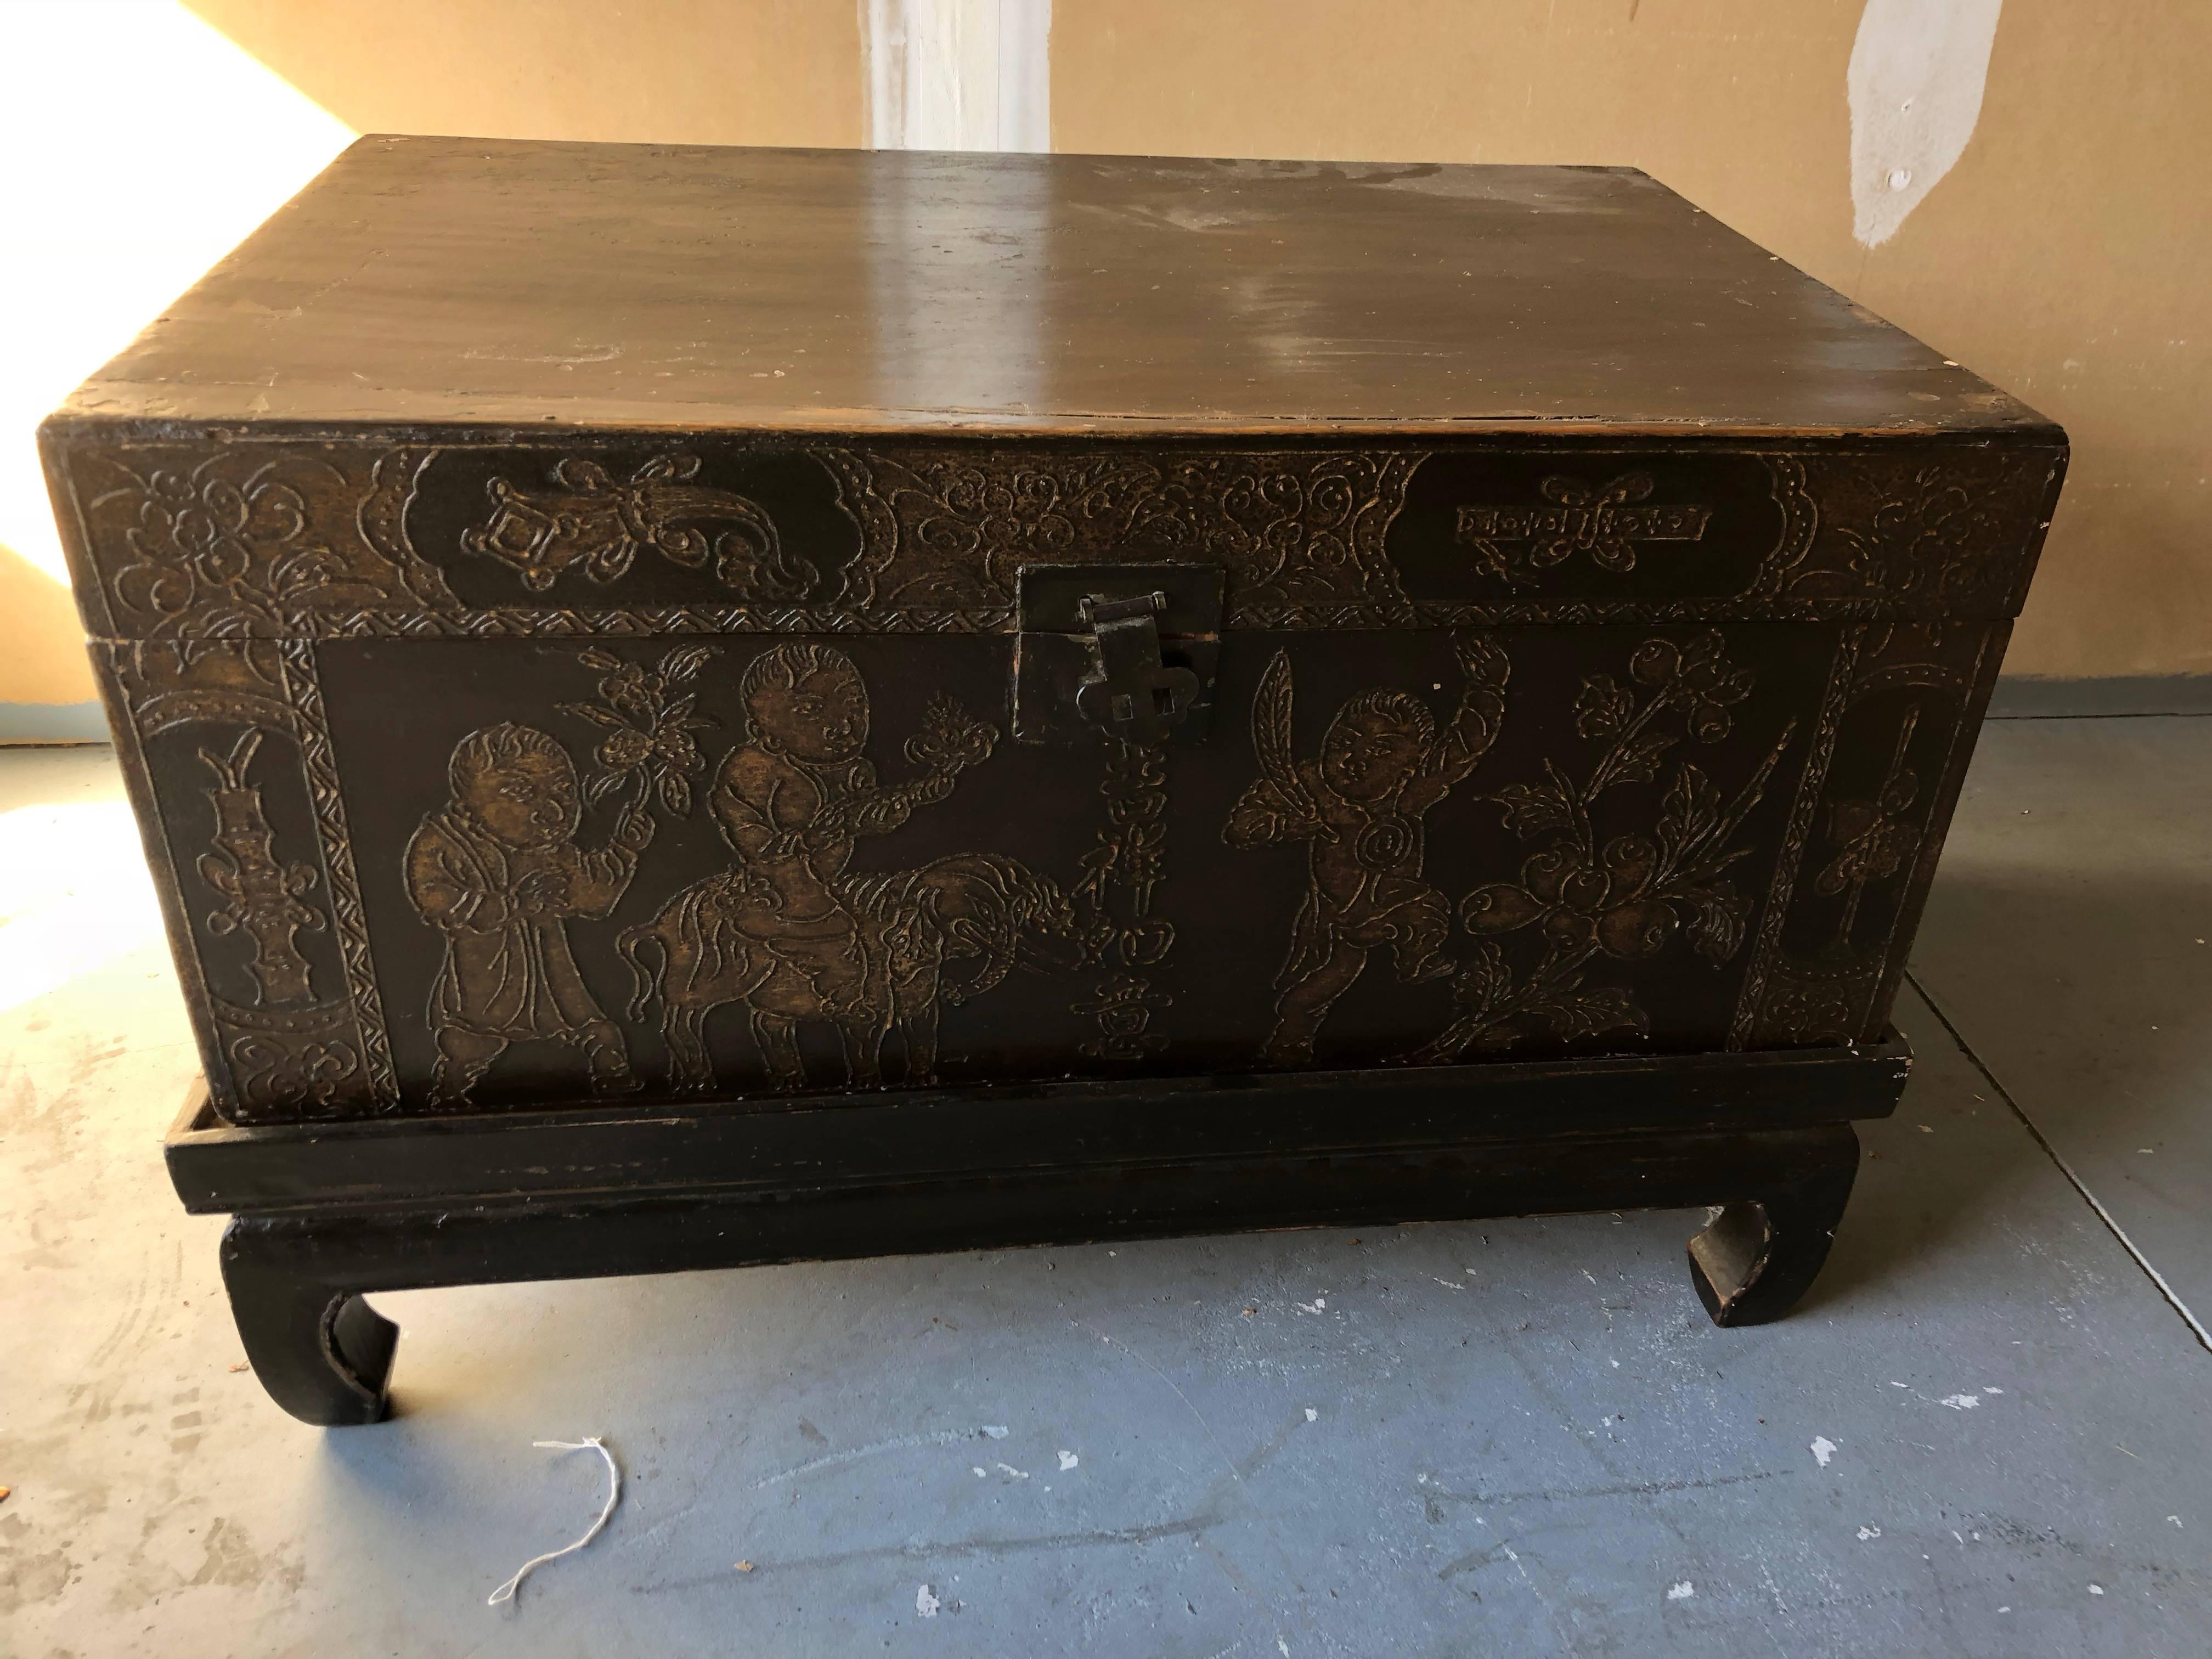 This pair of black lacquered trunks have handmade stands with hoof feet. Gold leaf hand painted fronts showing children at play. The locks and hinges are brass. Can be a coffee table or used as side tables.